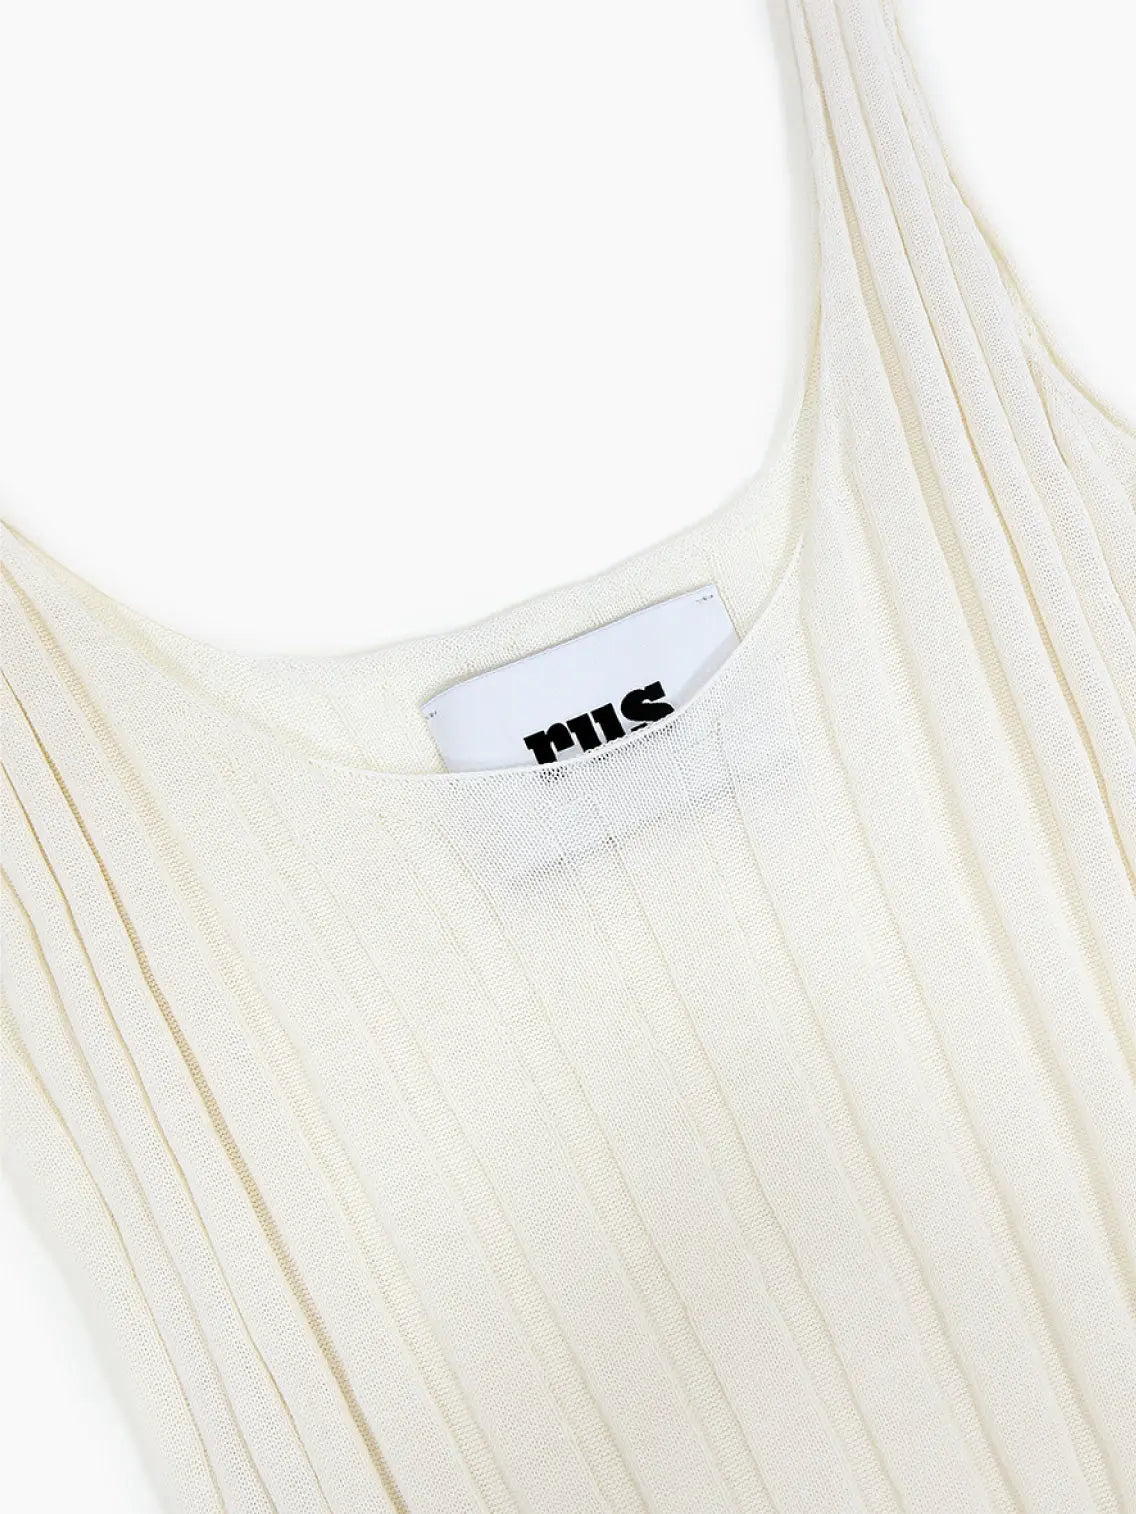 A Stella Top Chalk by Rus, sleeveless, cream-colored, ribbed knit dress with thin straps and a scoop neckline, laid flat on a white background. The dress has a fitted, slightly flared silhouette and features a small white label with black text on the inside of the back neckline. Available exclusively at Bassalstore in Barcelona.